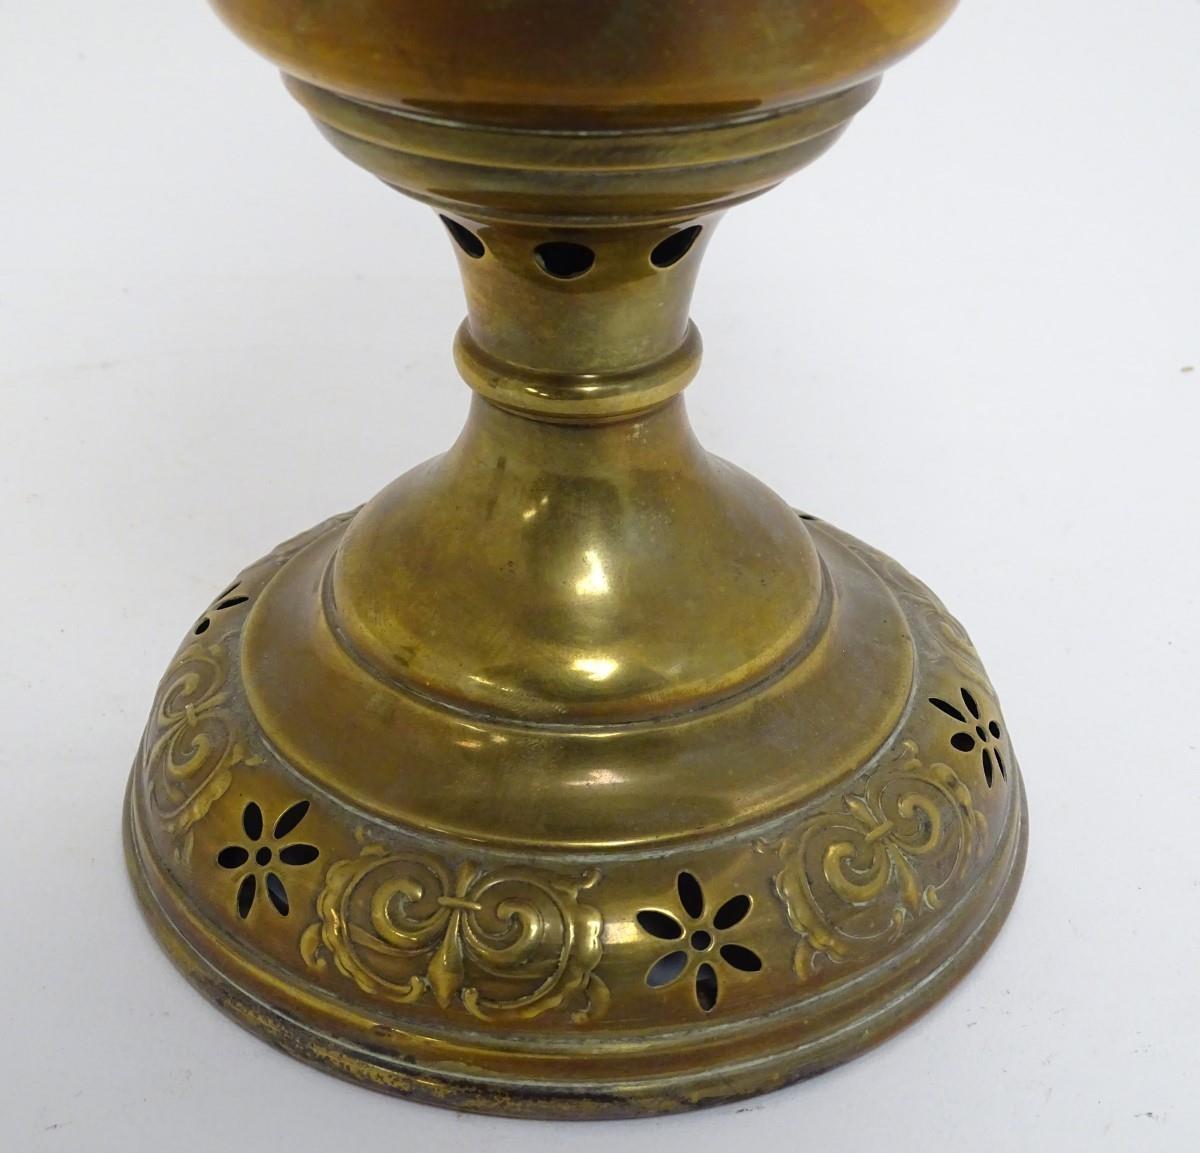 A Belgian c1930s Lempereur & Bernard oil lamp, the brass stand decorated with floral motifs and - Image 5 of 7